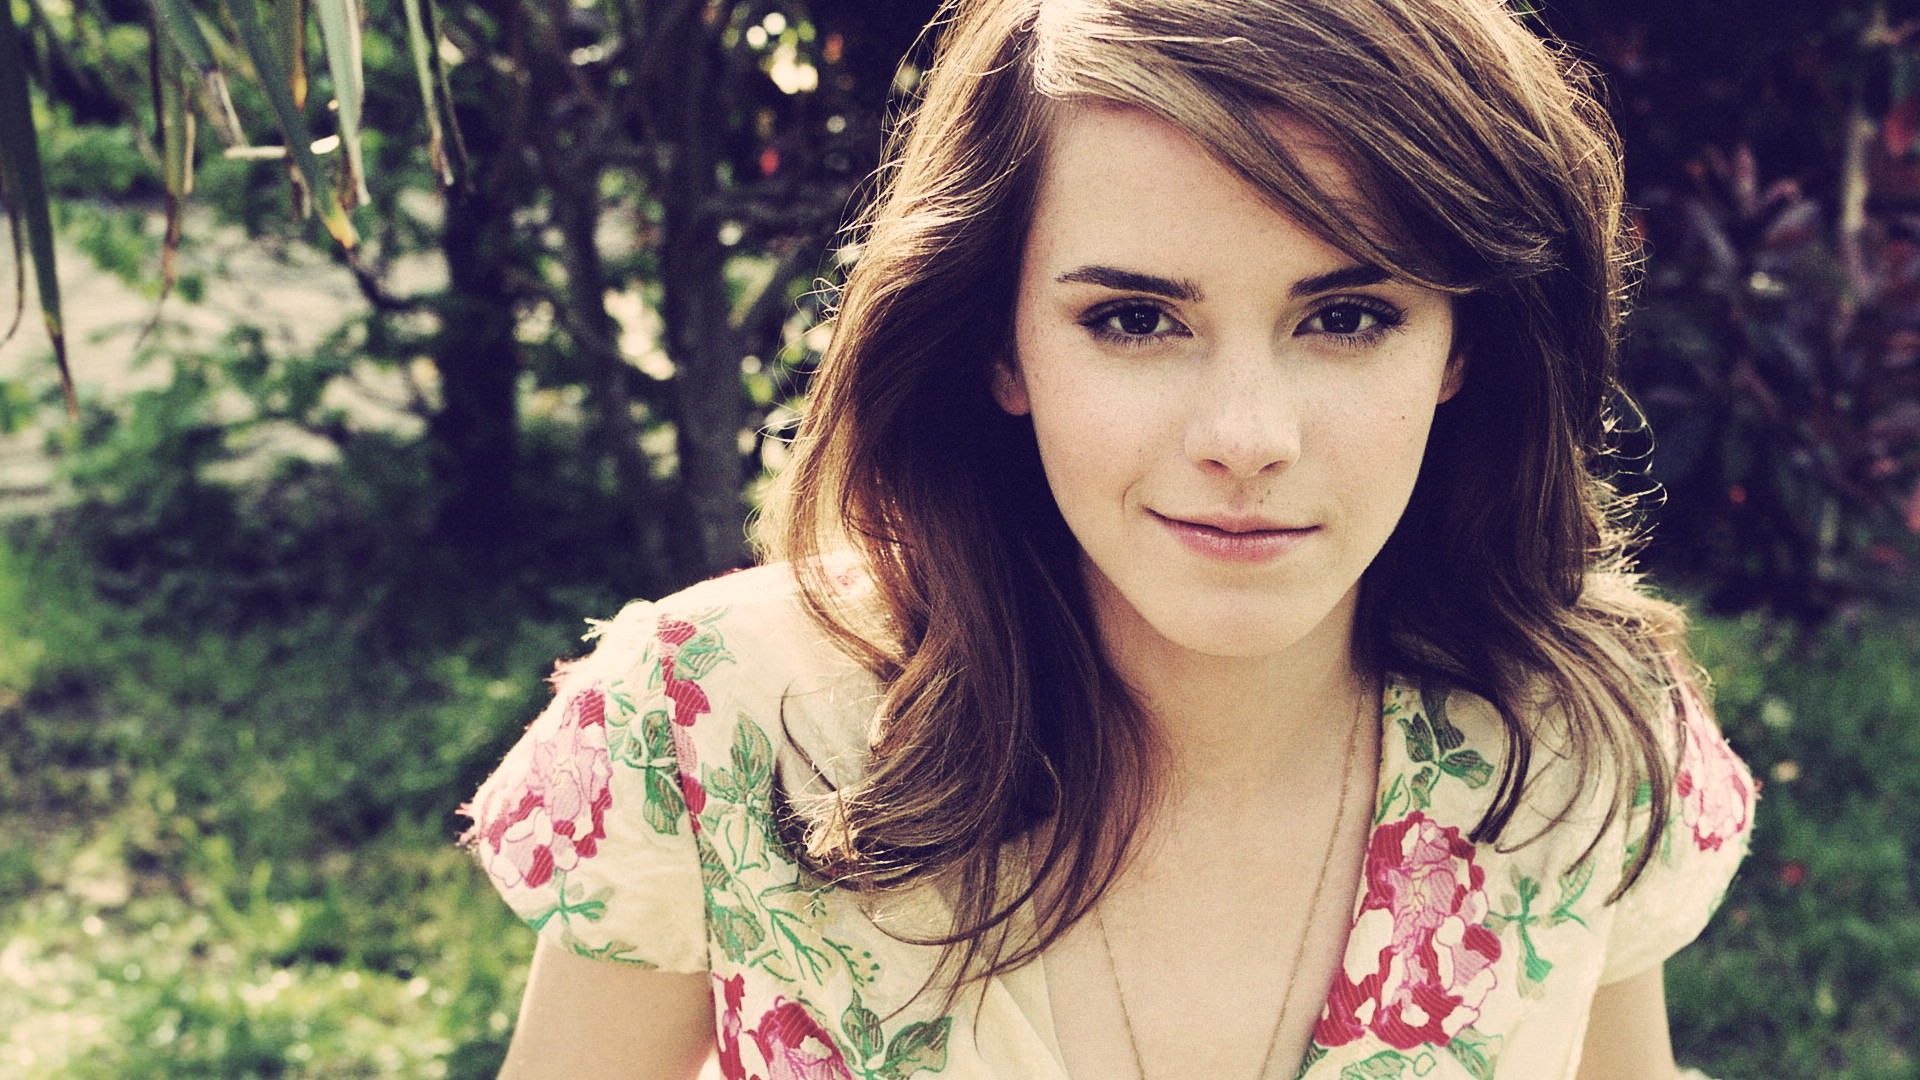 Emma Watson Wallpapers Images Photos Pictures Backgrounds Images, Photos, Reviews